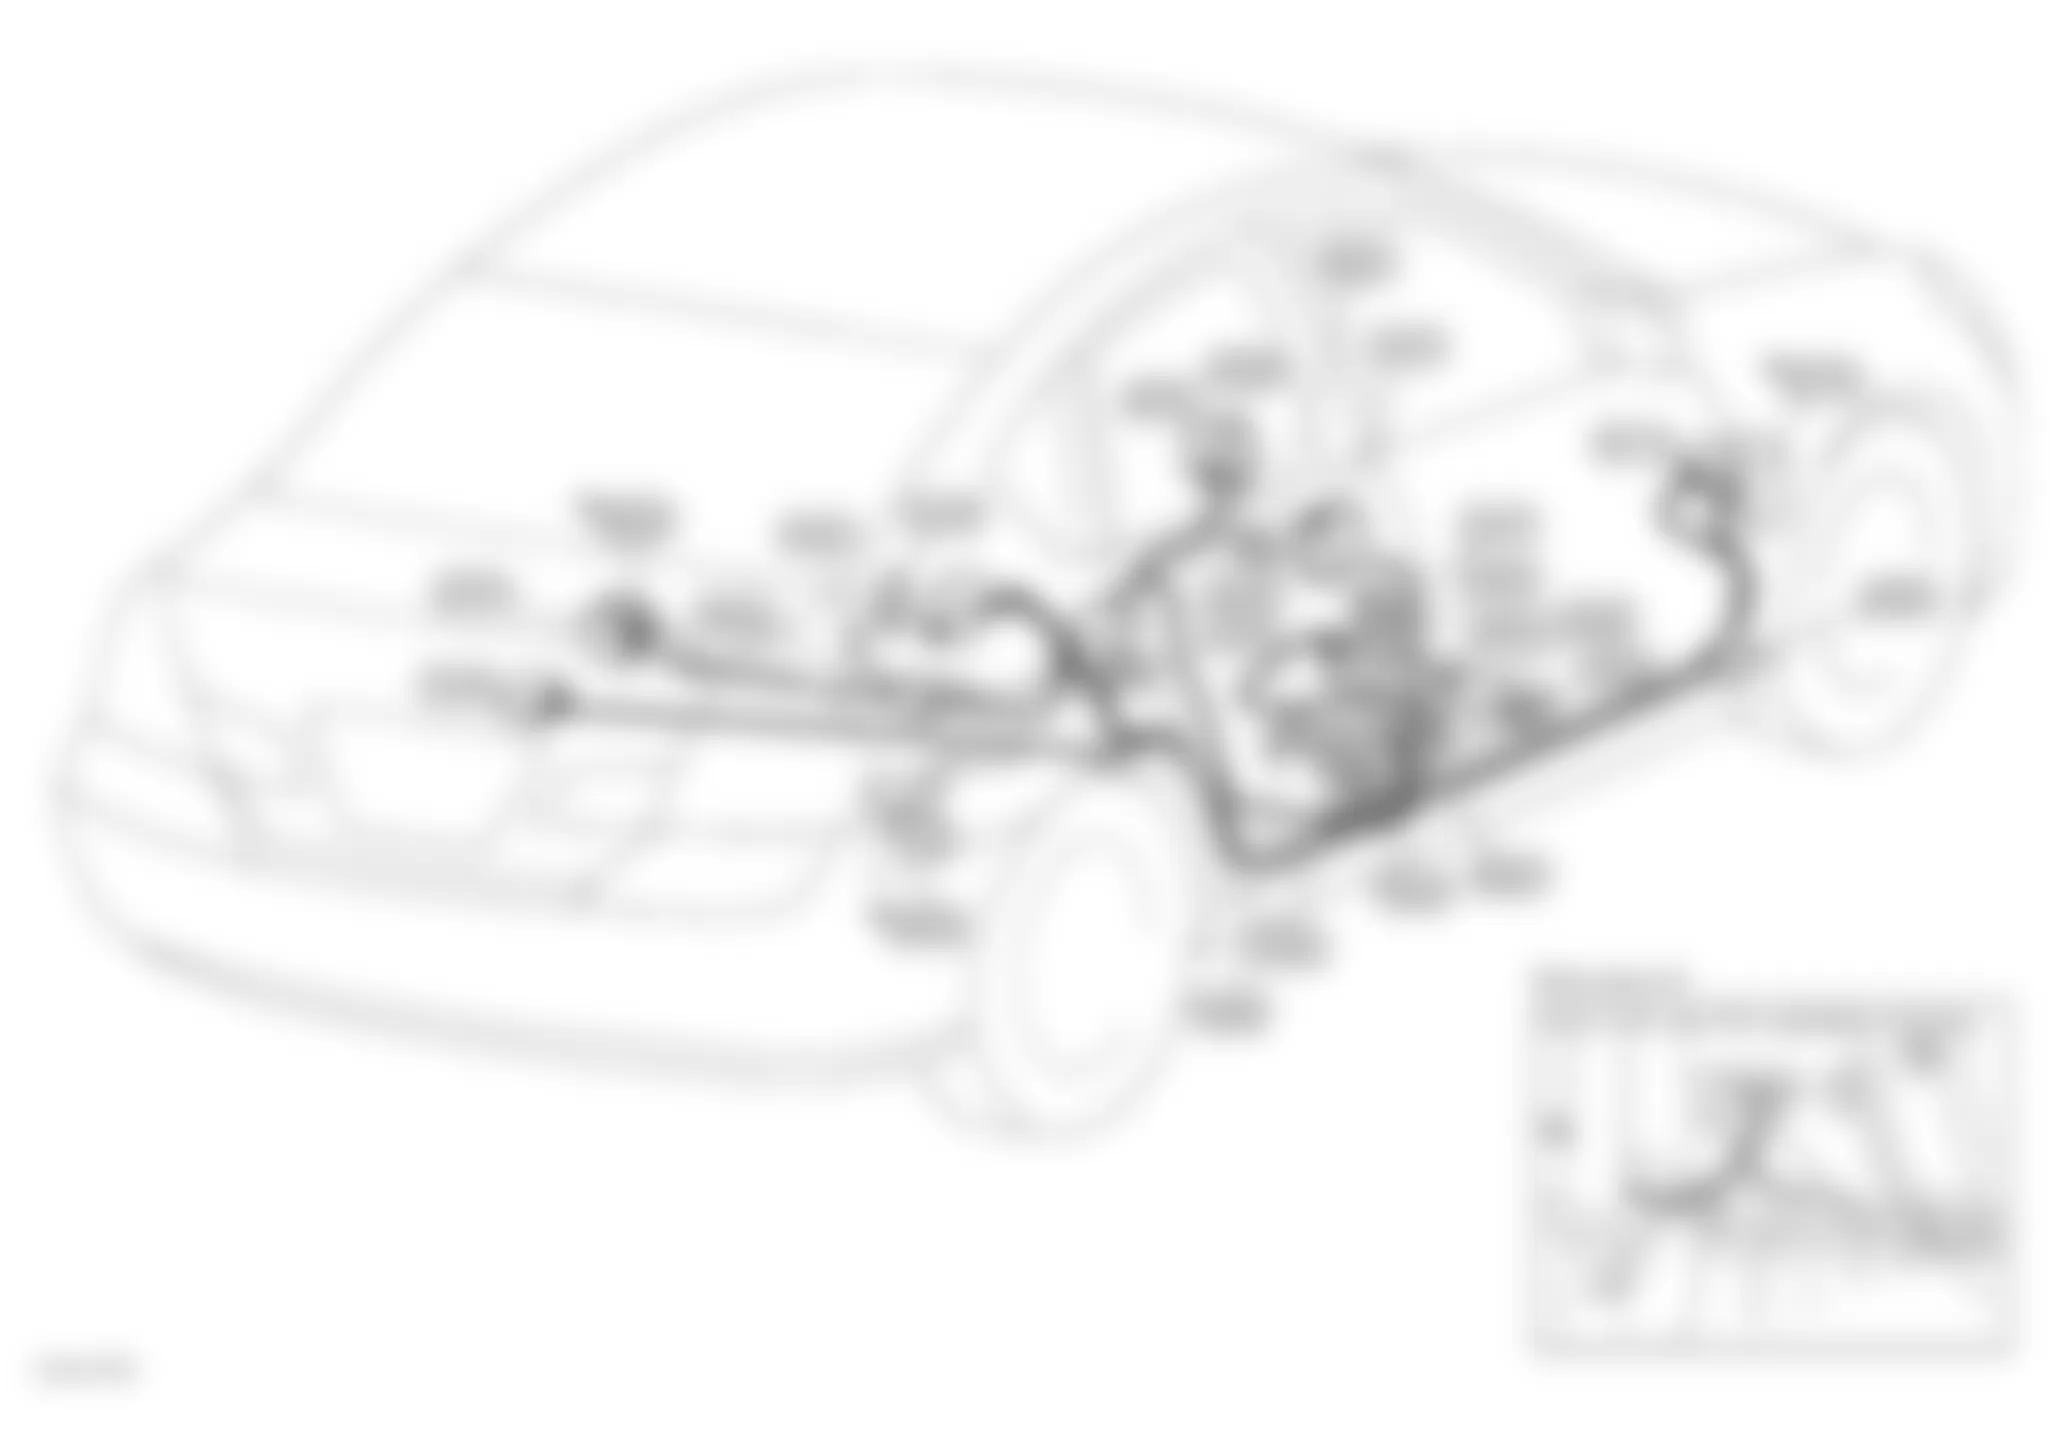 Infiniti M35 2008 - Component Locations -  Right Side Of Vehicle